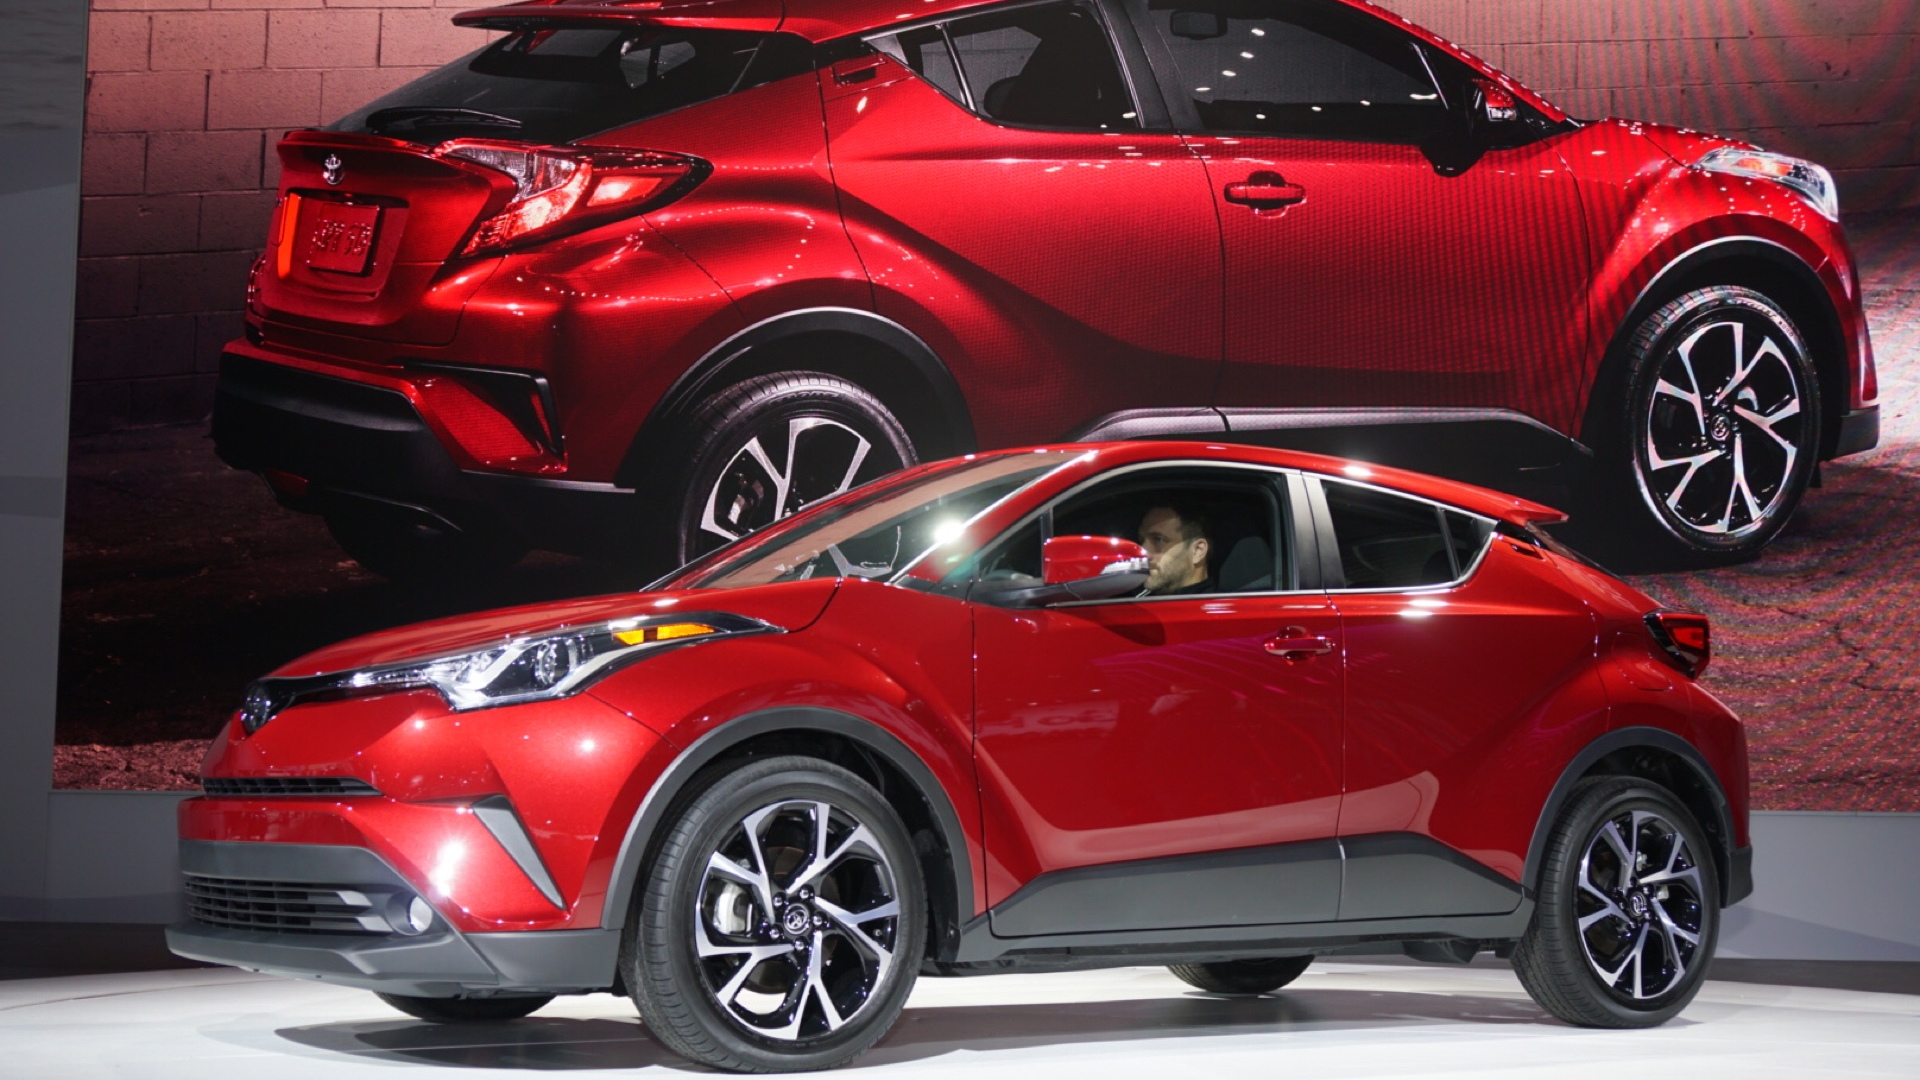 Toyota C-HR compact crossover launched in Japan - 1.2L 